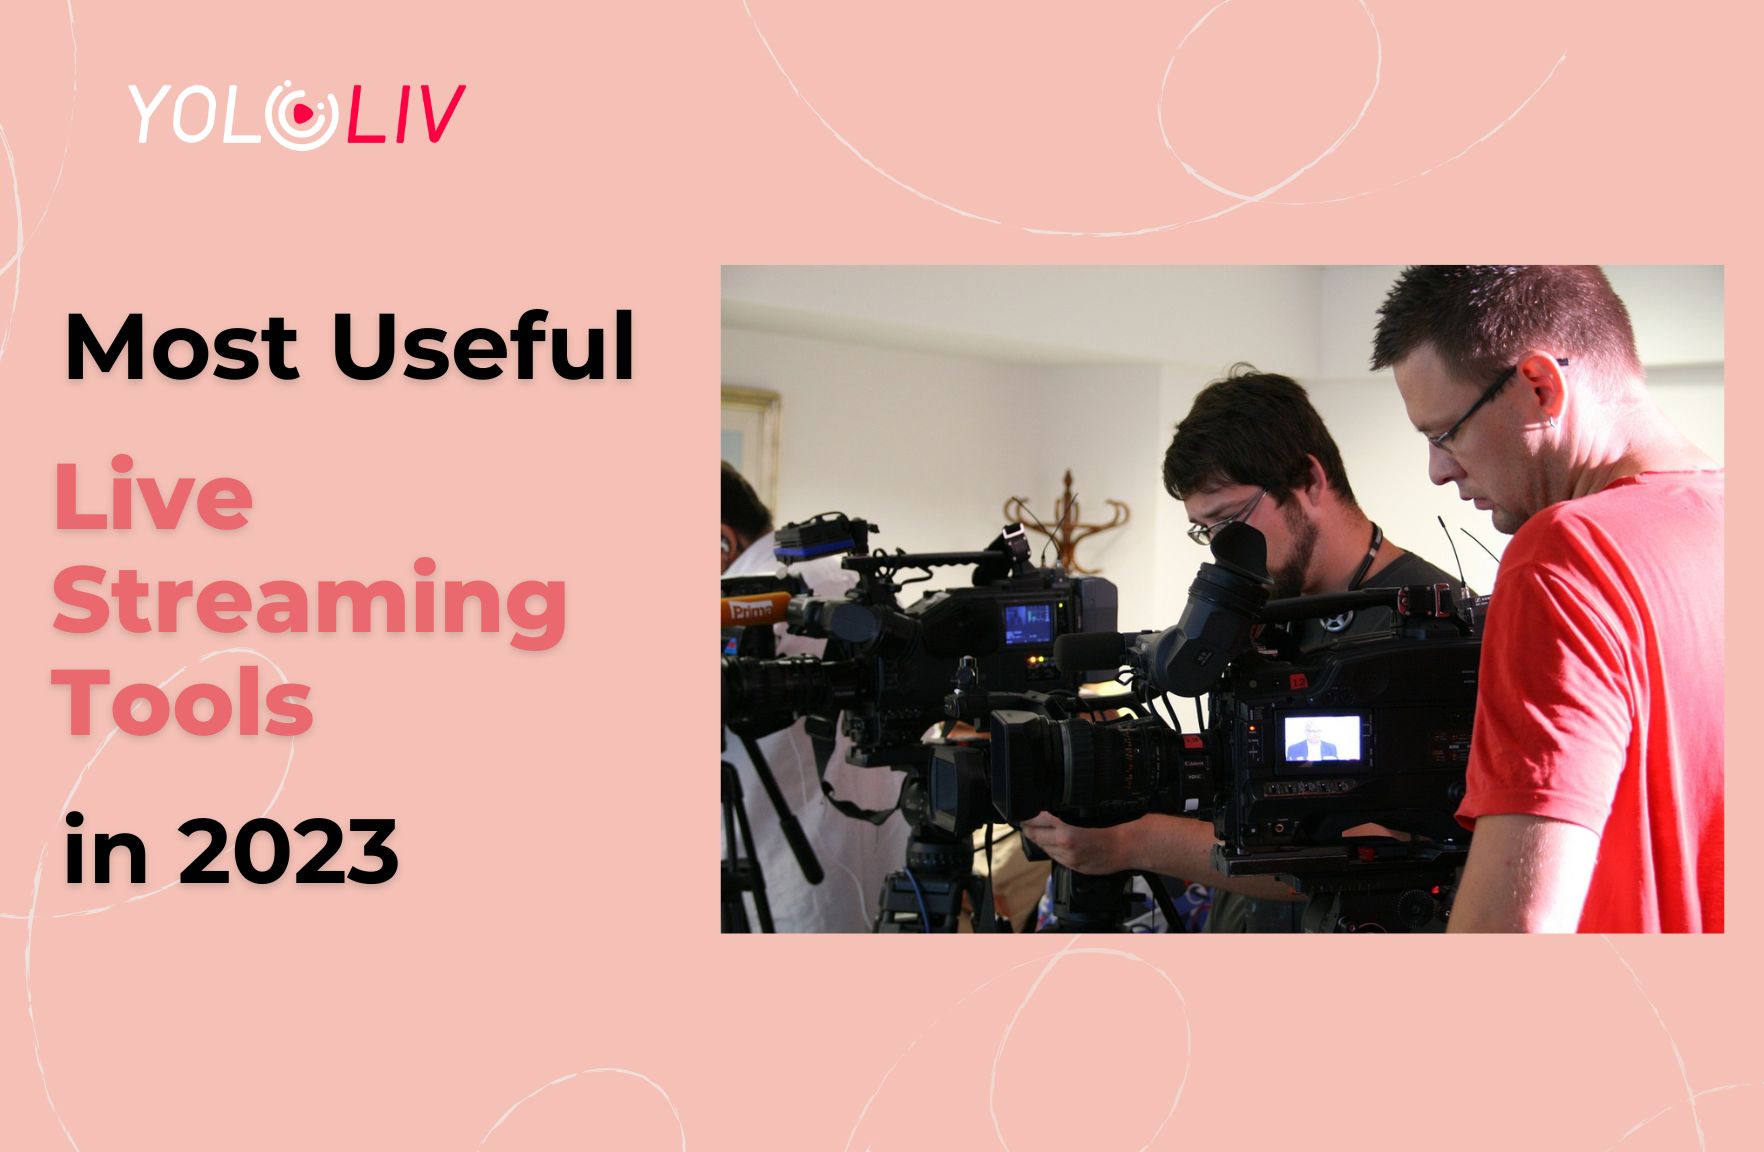 Most Useful Live Streaming Tools in 2023